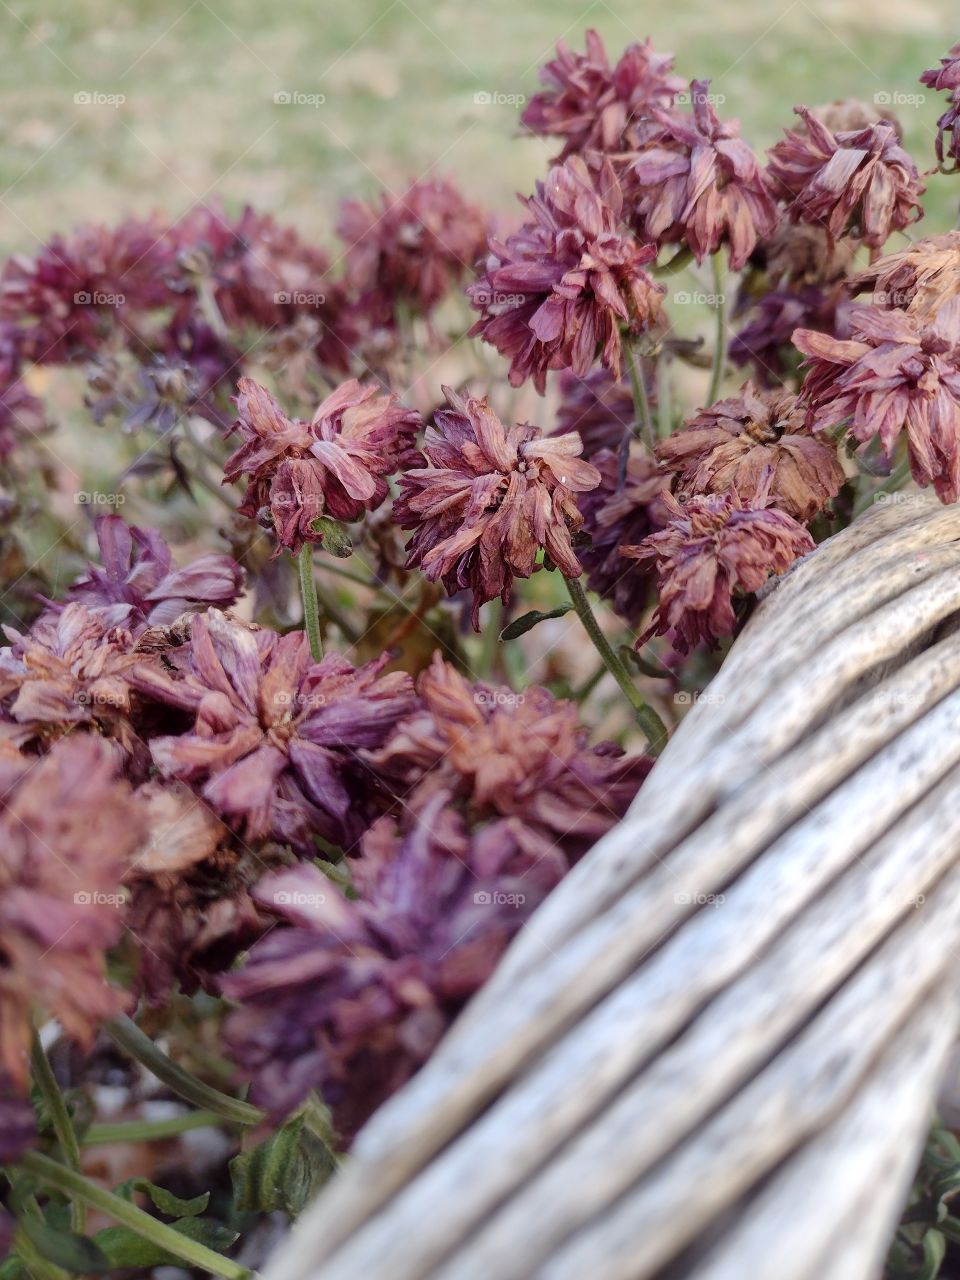 Unfiltered, beautiful, lovely close-up of flowers in a basket on a beautiful day